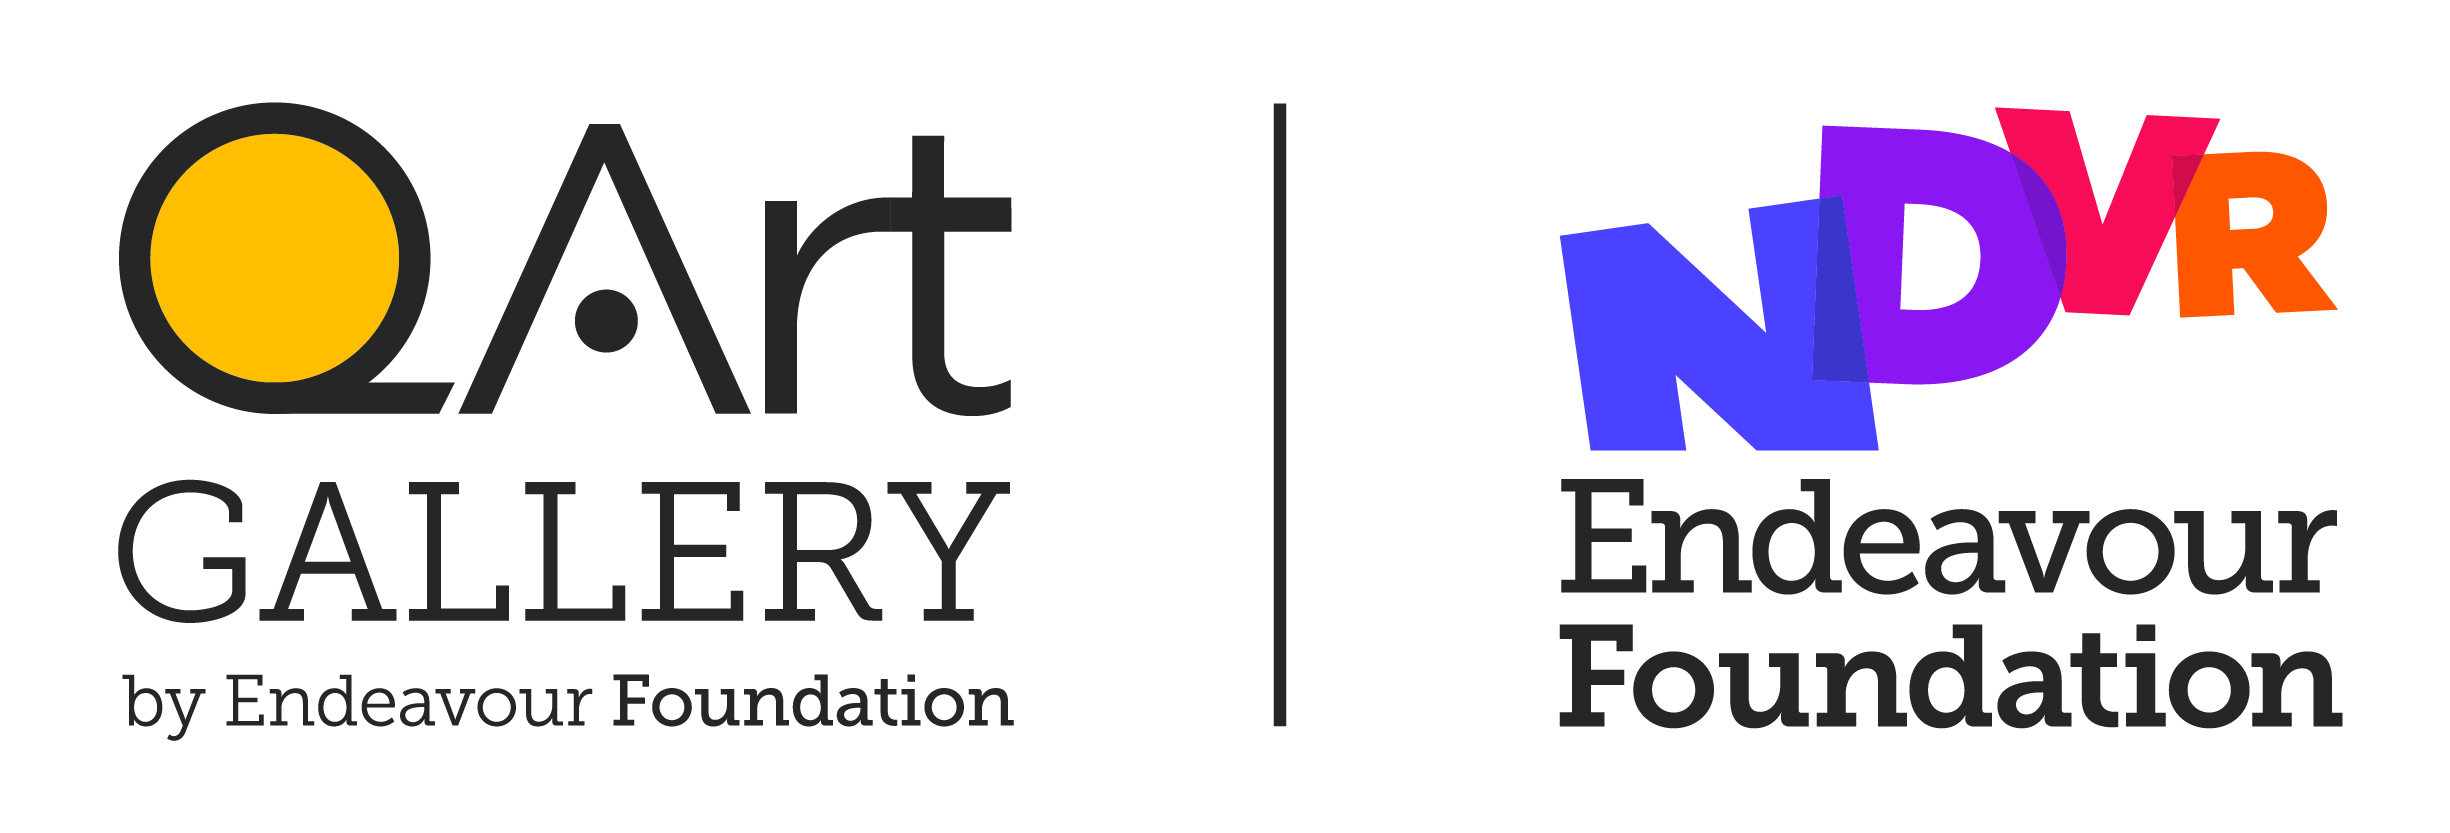 QArt Gallery by Endeavour Foundation and Endeavour Foundation logos